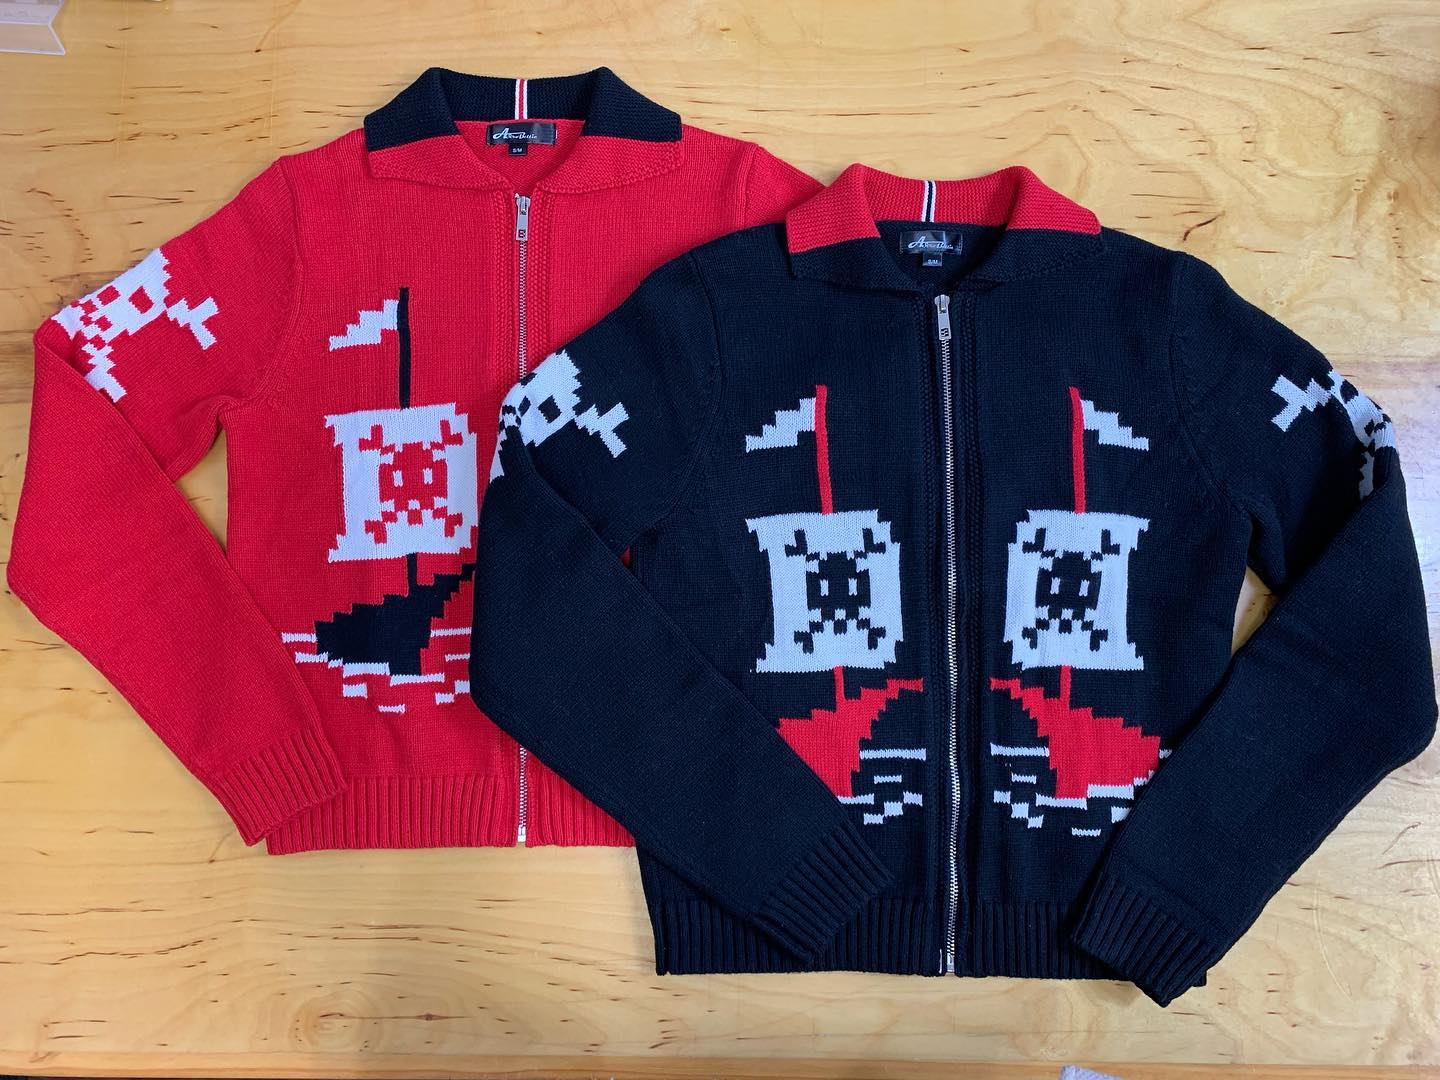 AHOY 1950's Pirate and Skulls Sweater-Black